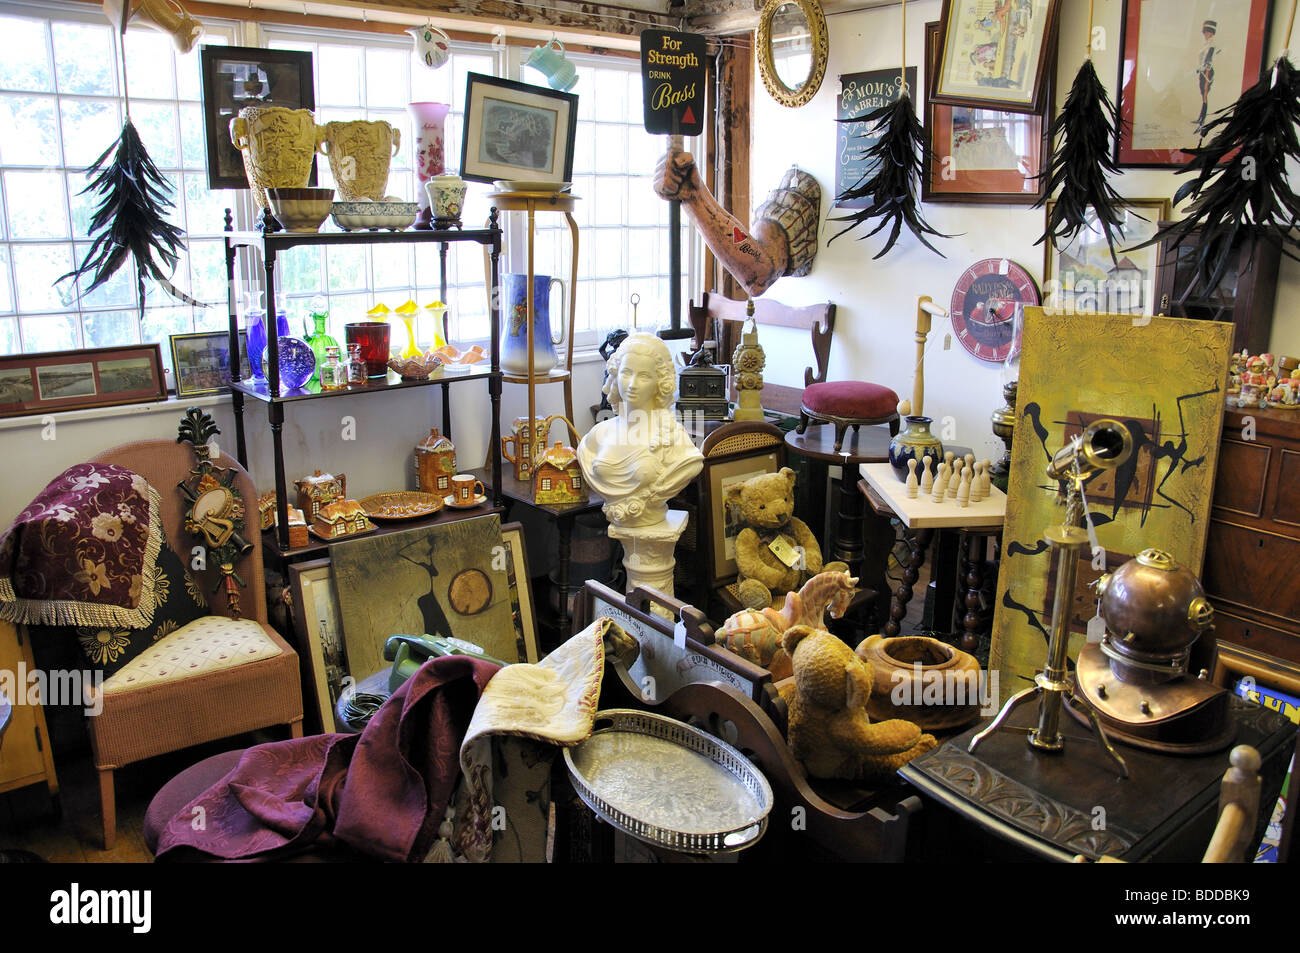 Interior display, Townsford Mill Antiques Centre, The Causeway, Halstead, Essex, England, United Kingdom Stock Photo